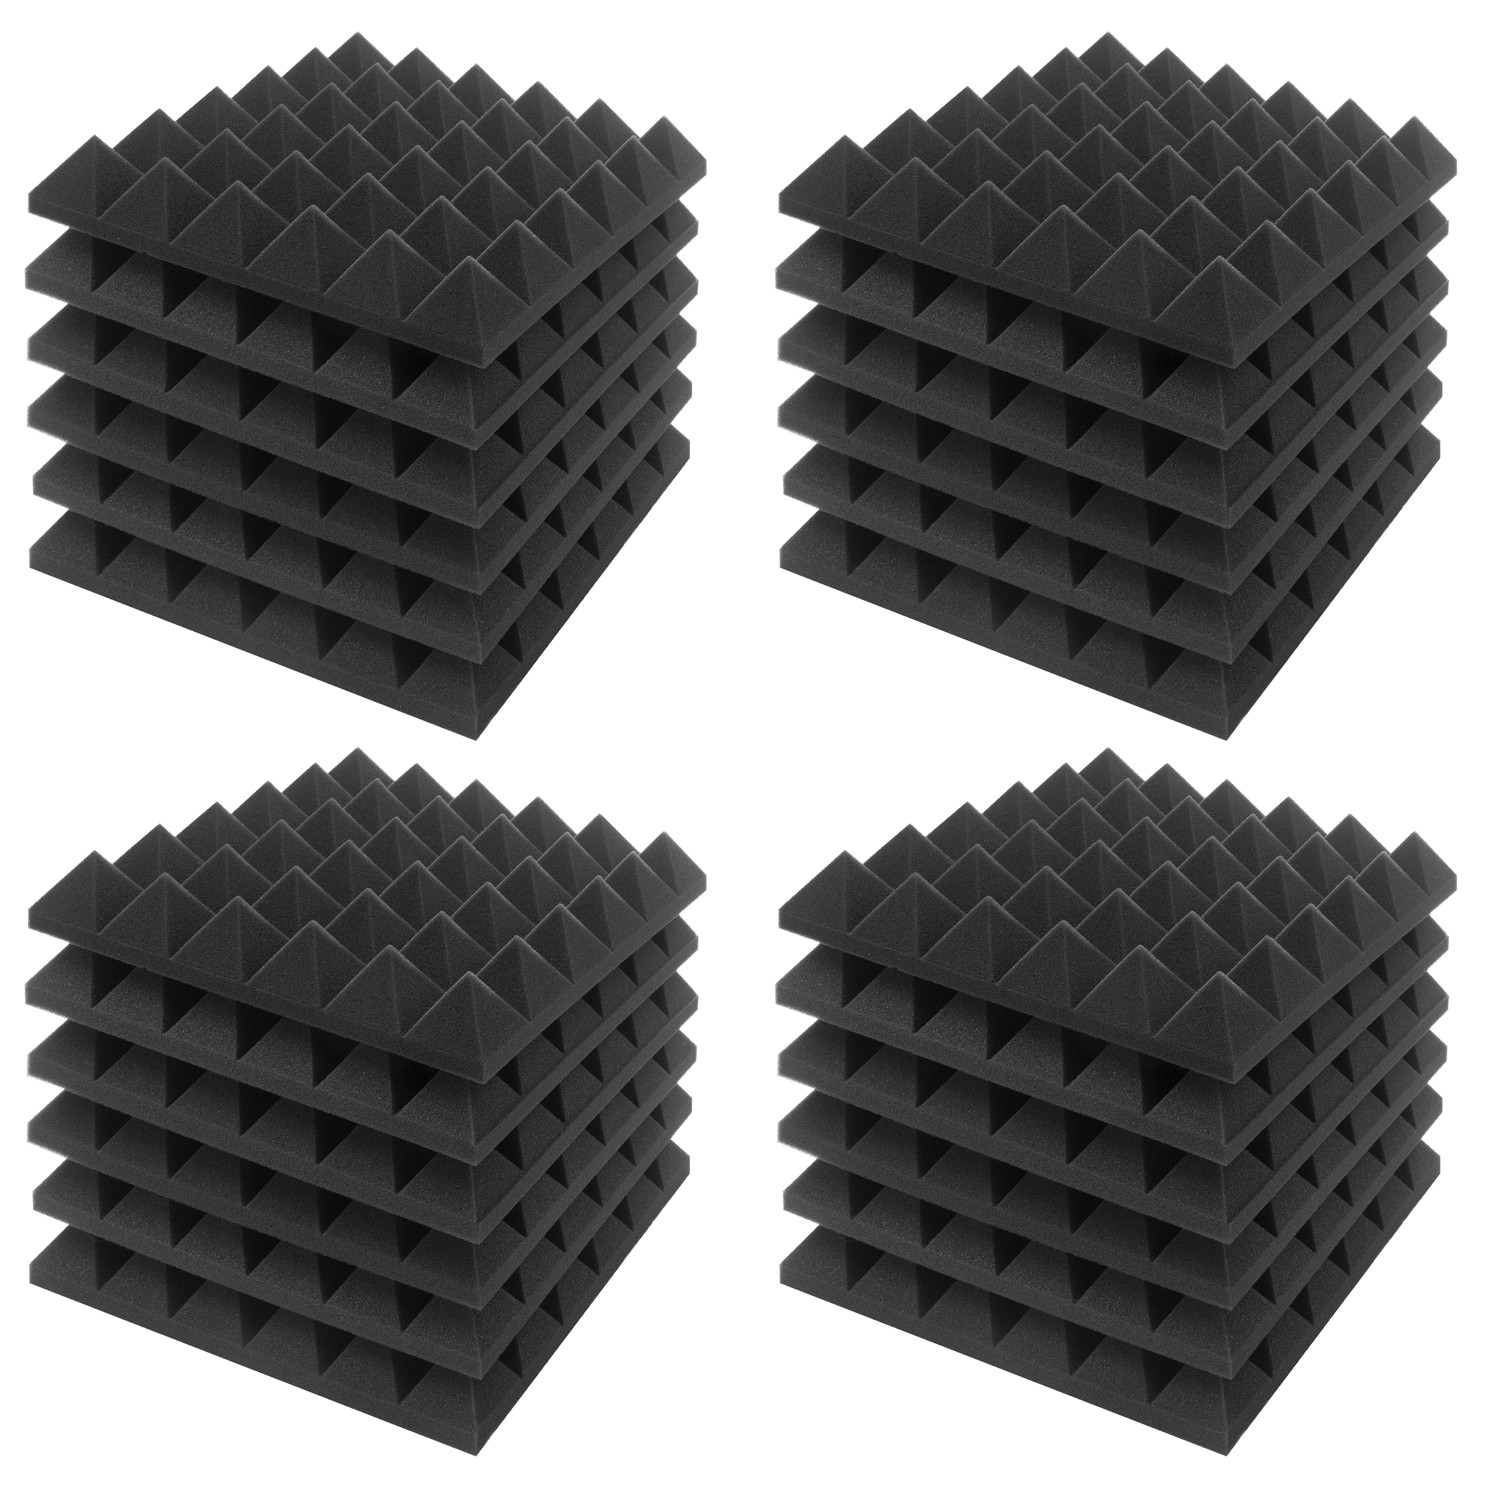 JBER Professional Acoustic Foam Panels Sound Proof Padding Soundproofing Absorption Panel 12 x 12 x 0.4 High Density Beveled Edge Wall Tiles for Acoustic Treatment, 12 Pack Gray 